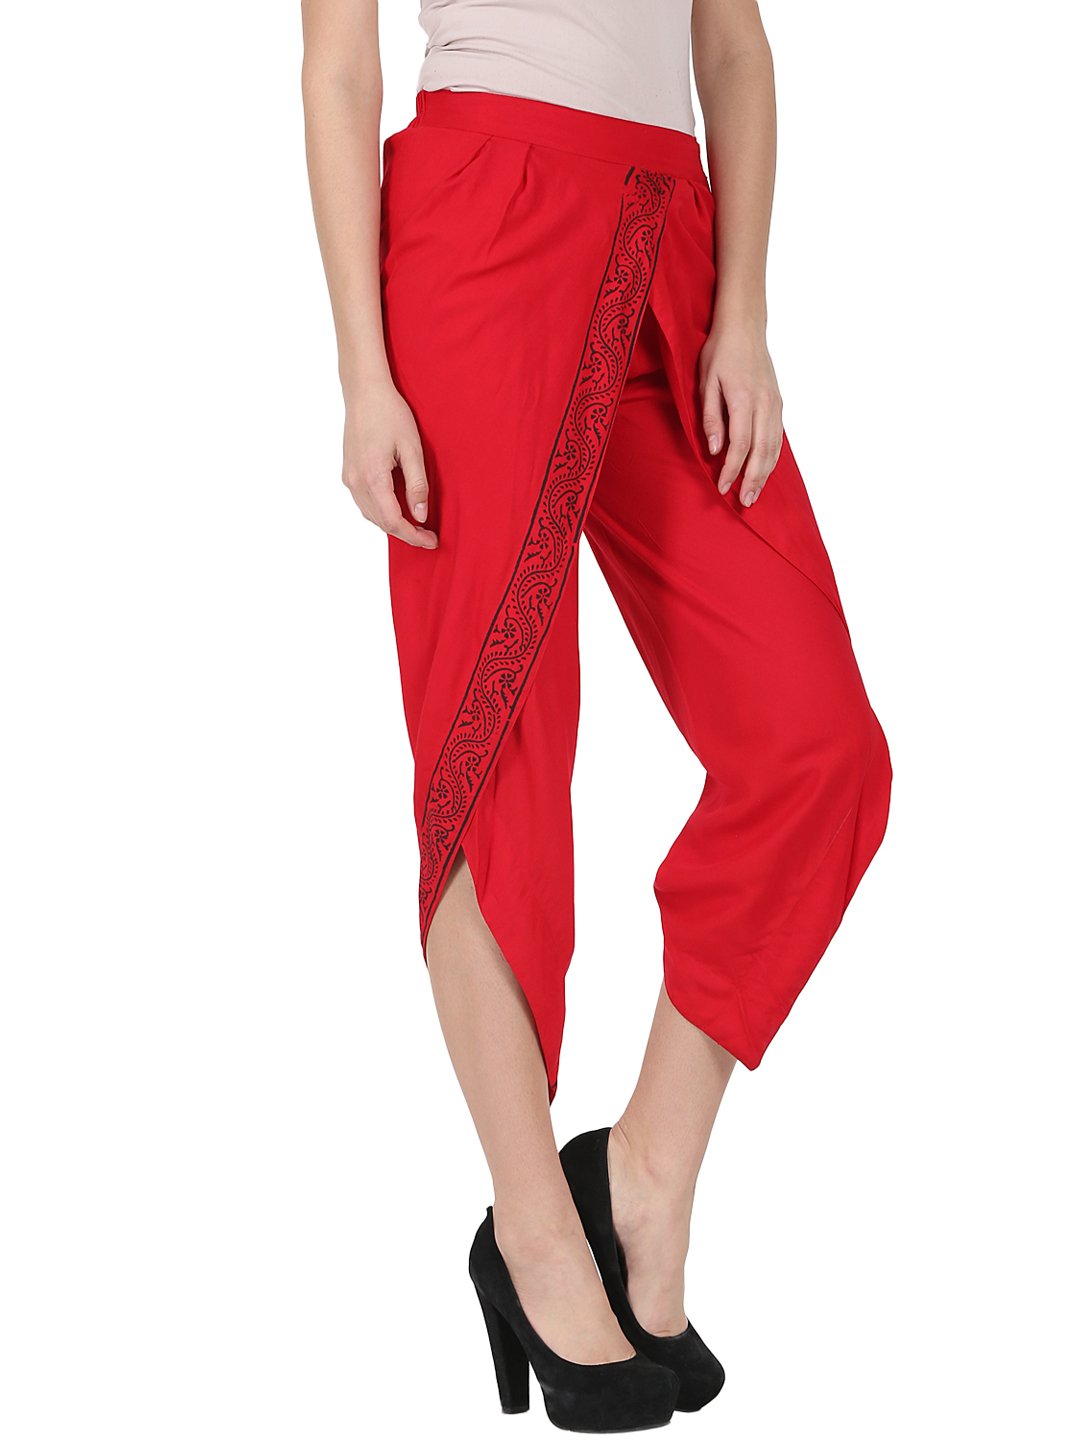 Women's Red Ankle Length Rayon Block Printed Dhoti - Nayo Clothing